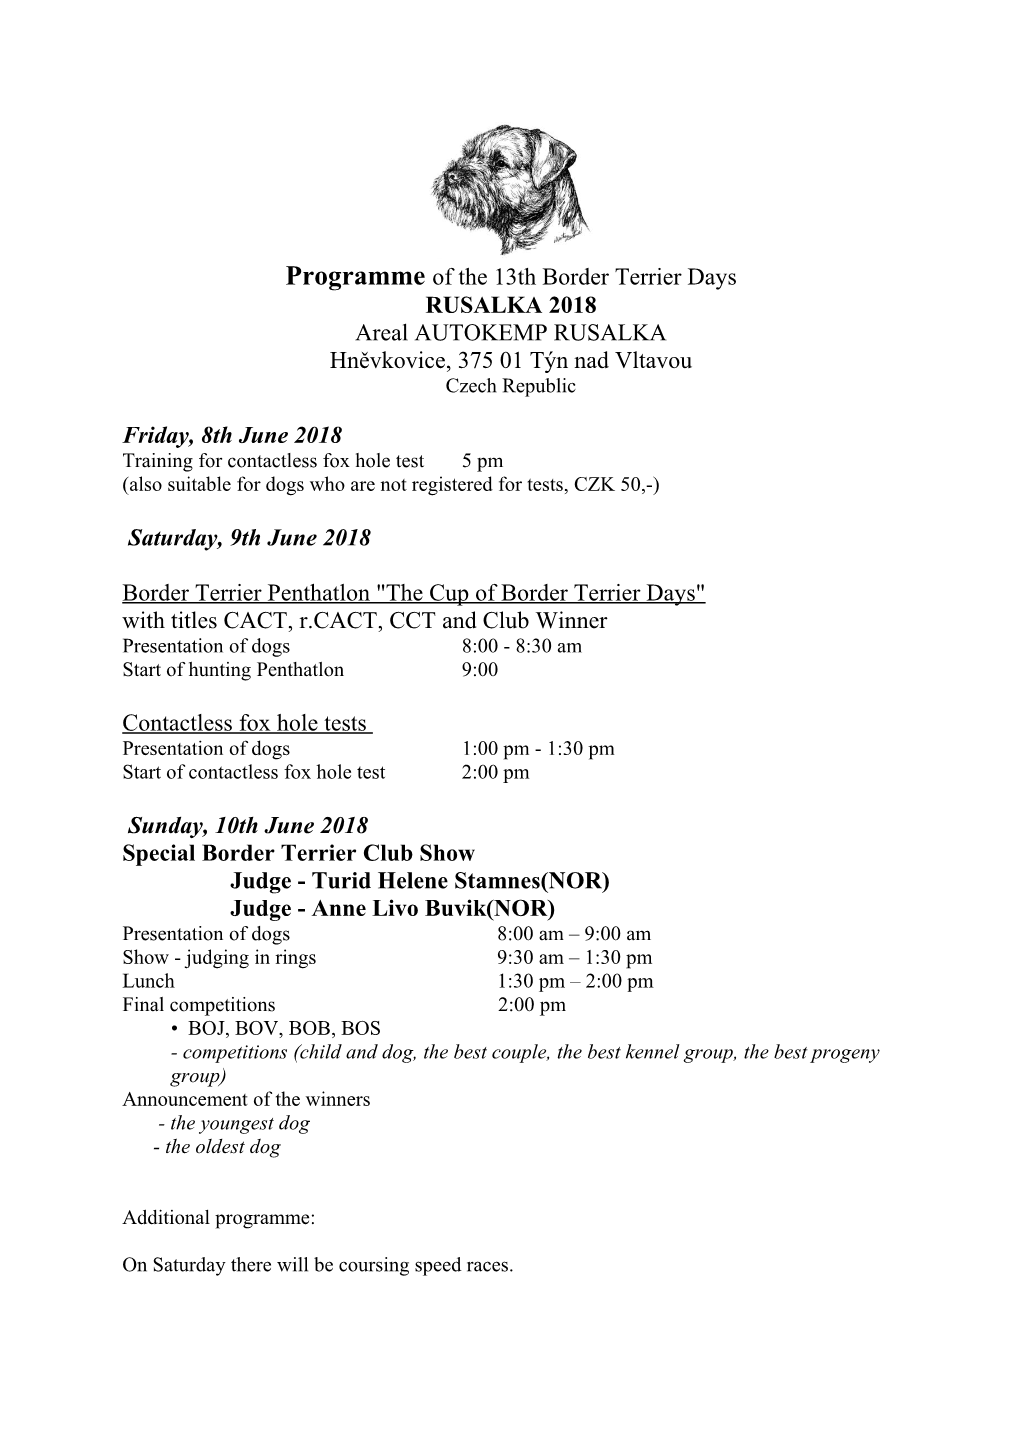 Programme of the 13Th Border Terrier Days